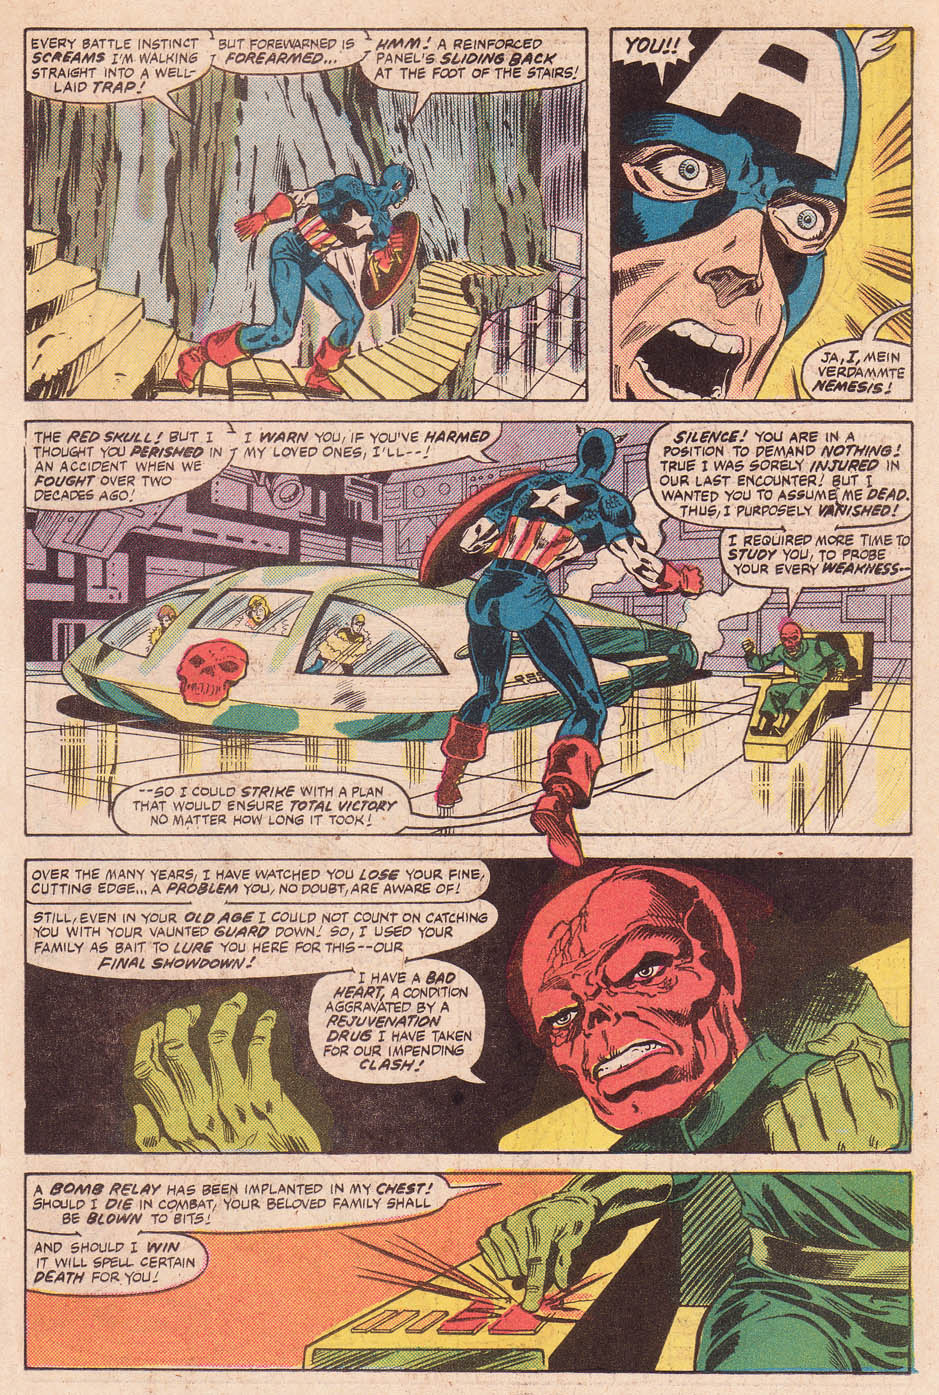 What If? (1977) issue 38 - Daredevil and Captain America - Page 23